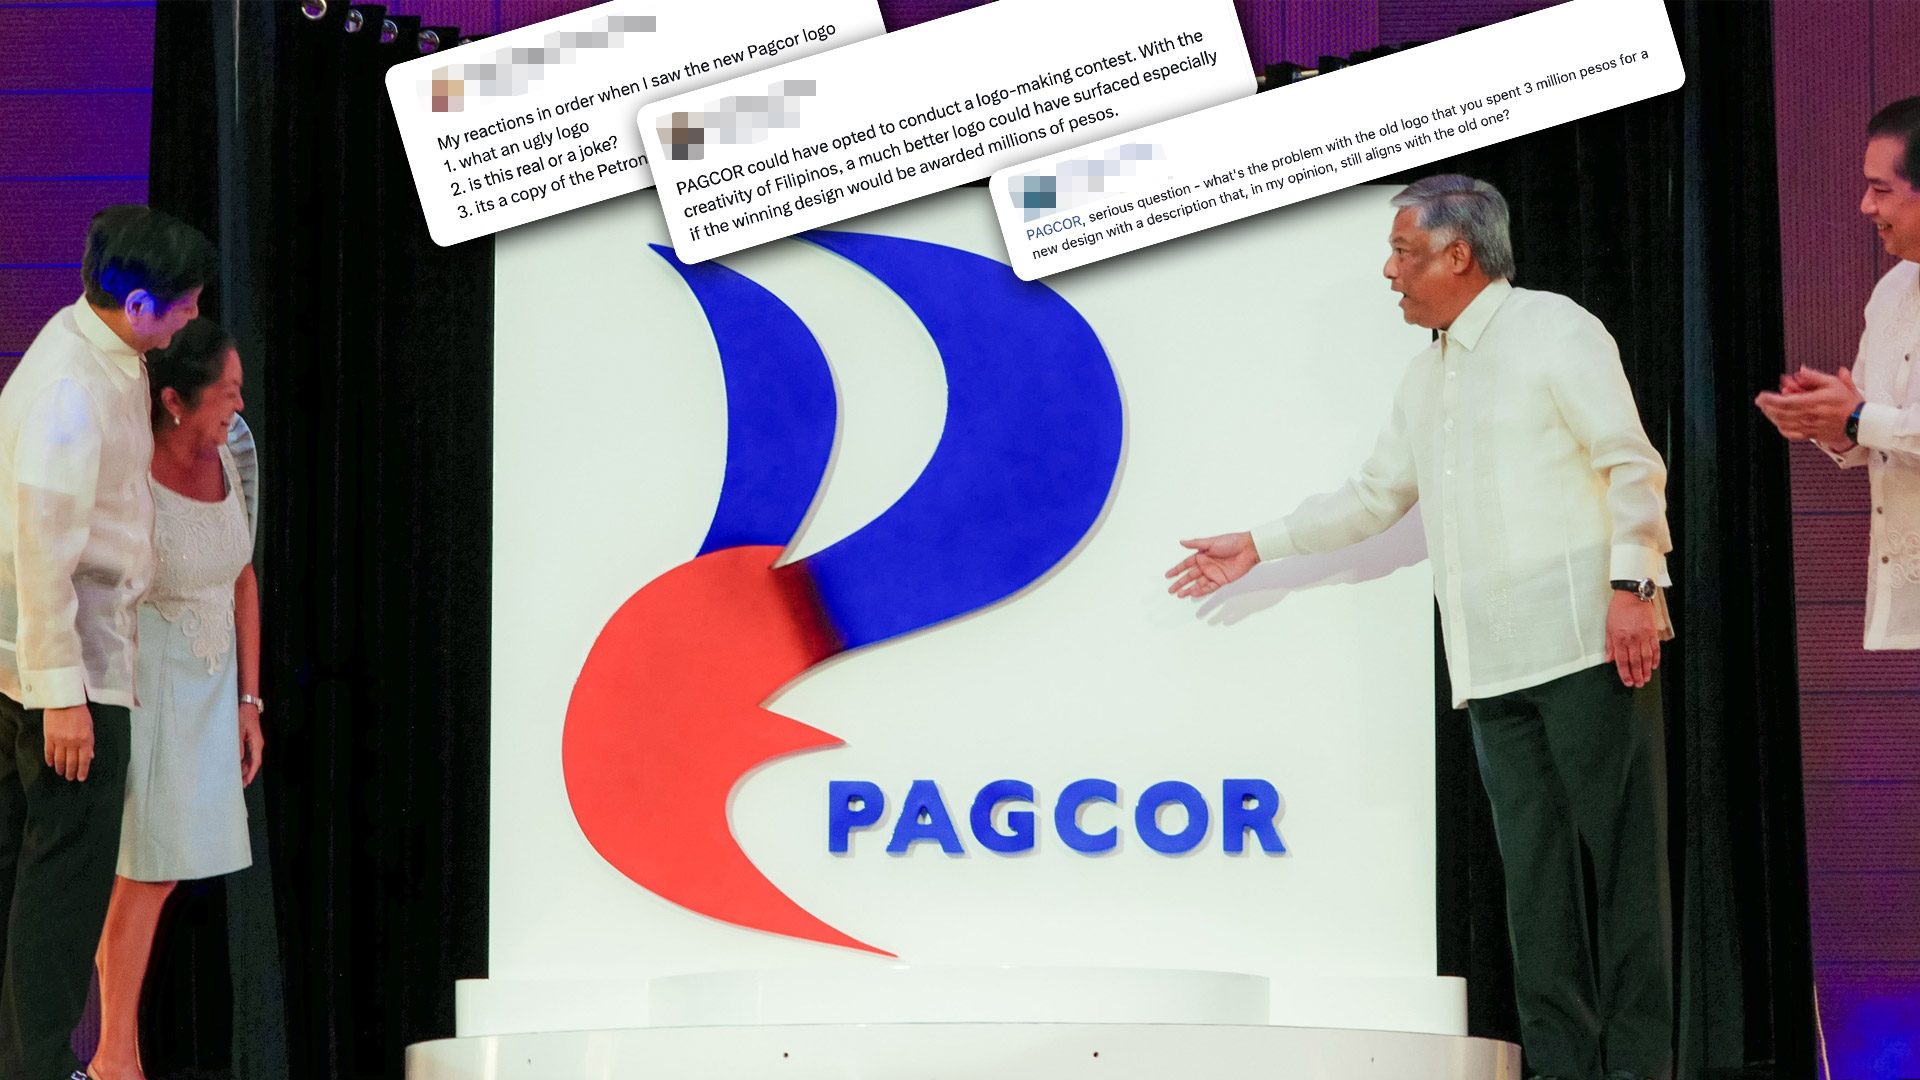 Another rebranding gone wrong? Netizens suggest better Pagcor logo designs